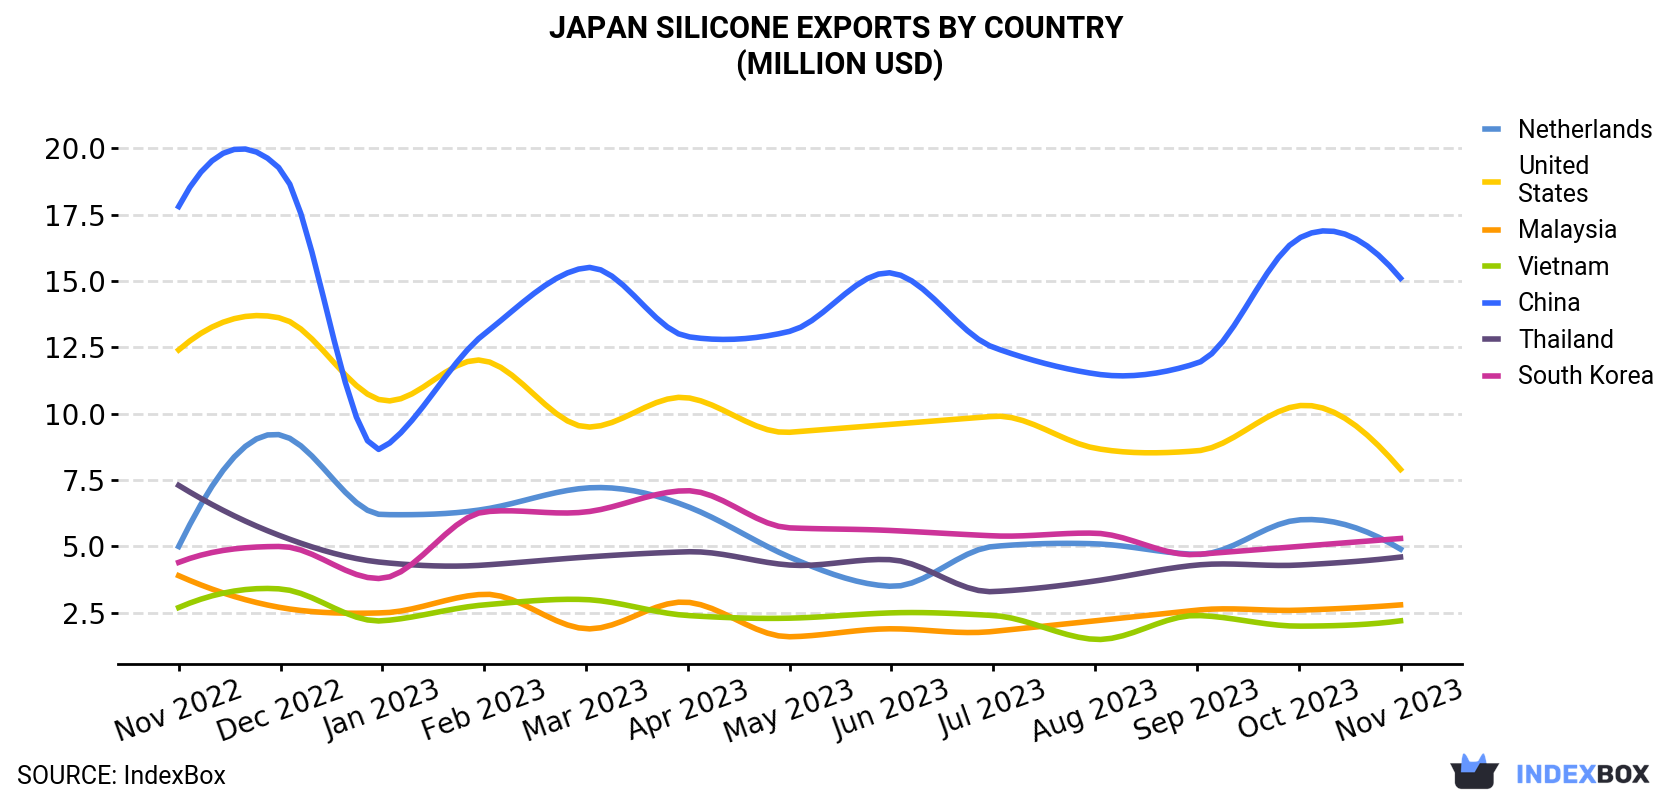 Japan Silicone Exports By Country (Million USD)